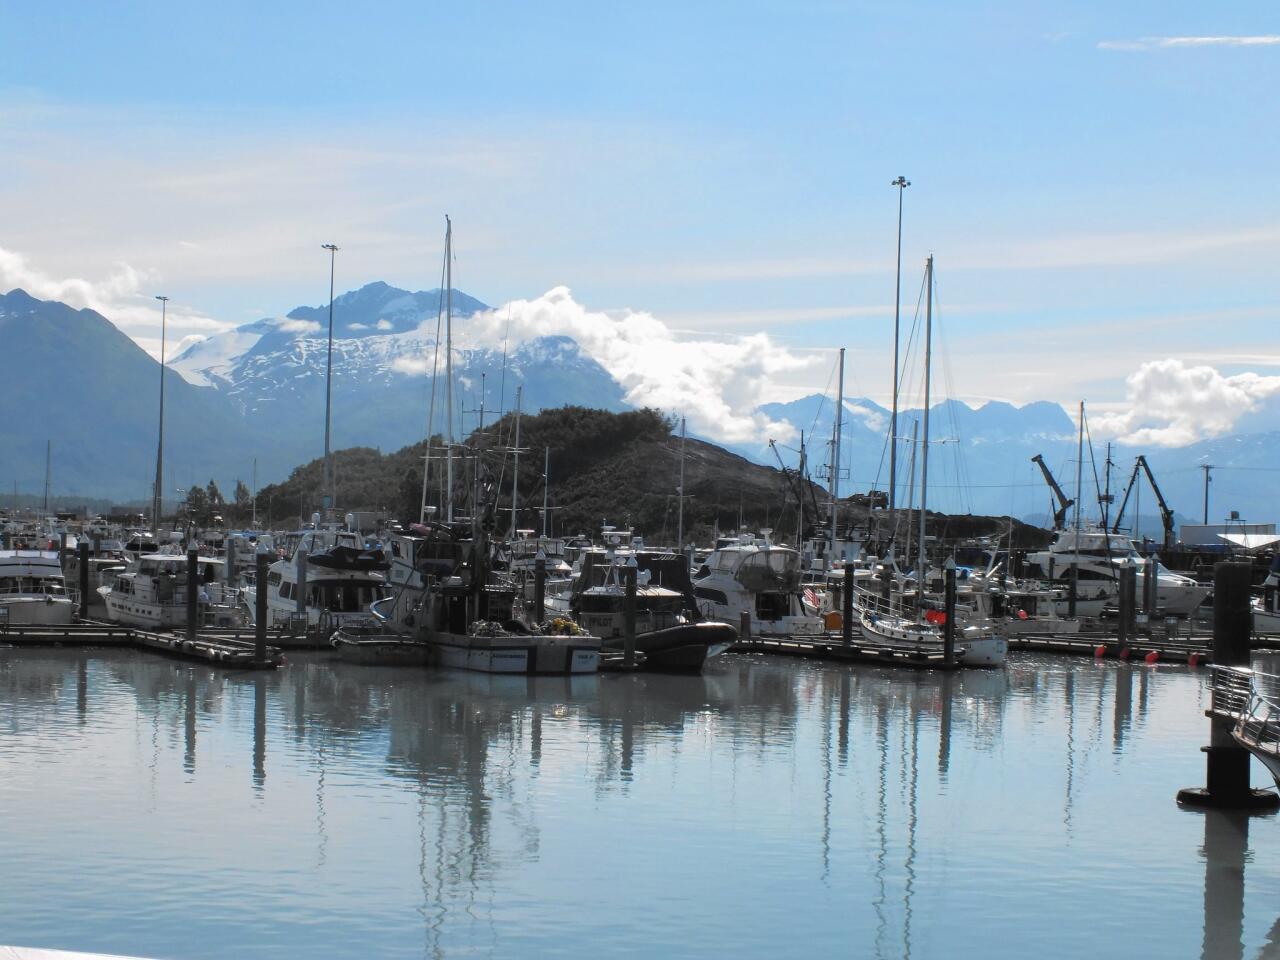 Dozens of fishing boats moored in the harbor at Valdez attest to the importance of commercial fishing. Salmon is the summer catch, while crews fish for halibut and shrimp during the winter months.